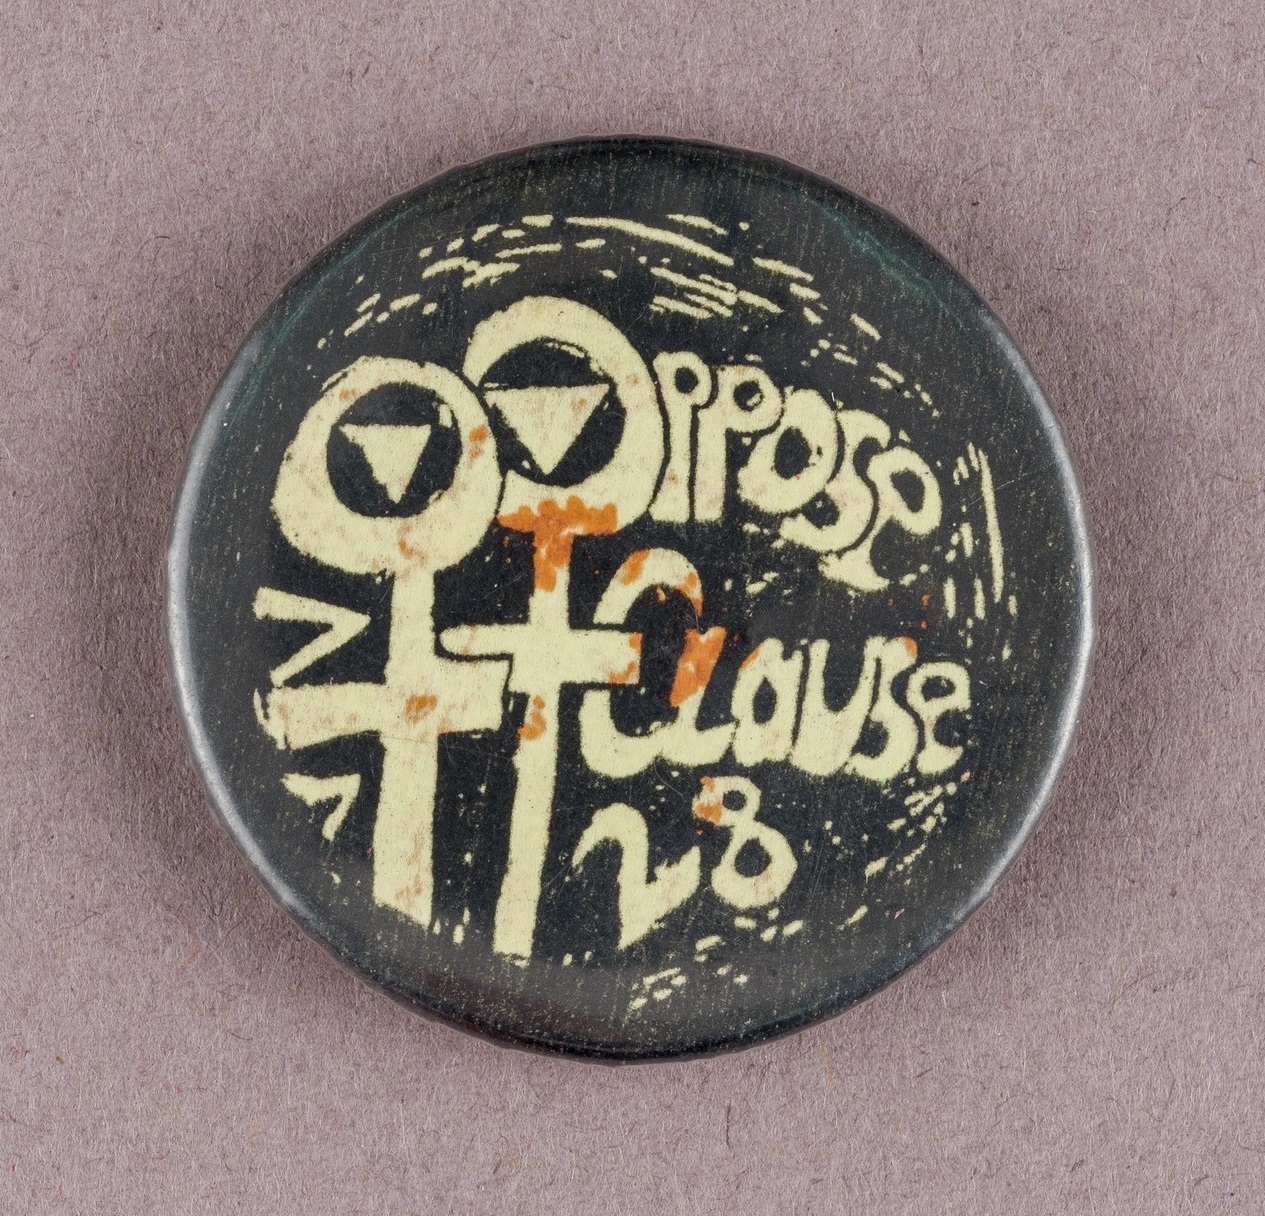 Badge worn during the campaign against Section 28